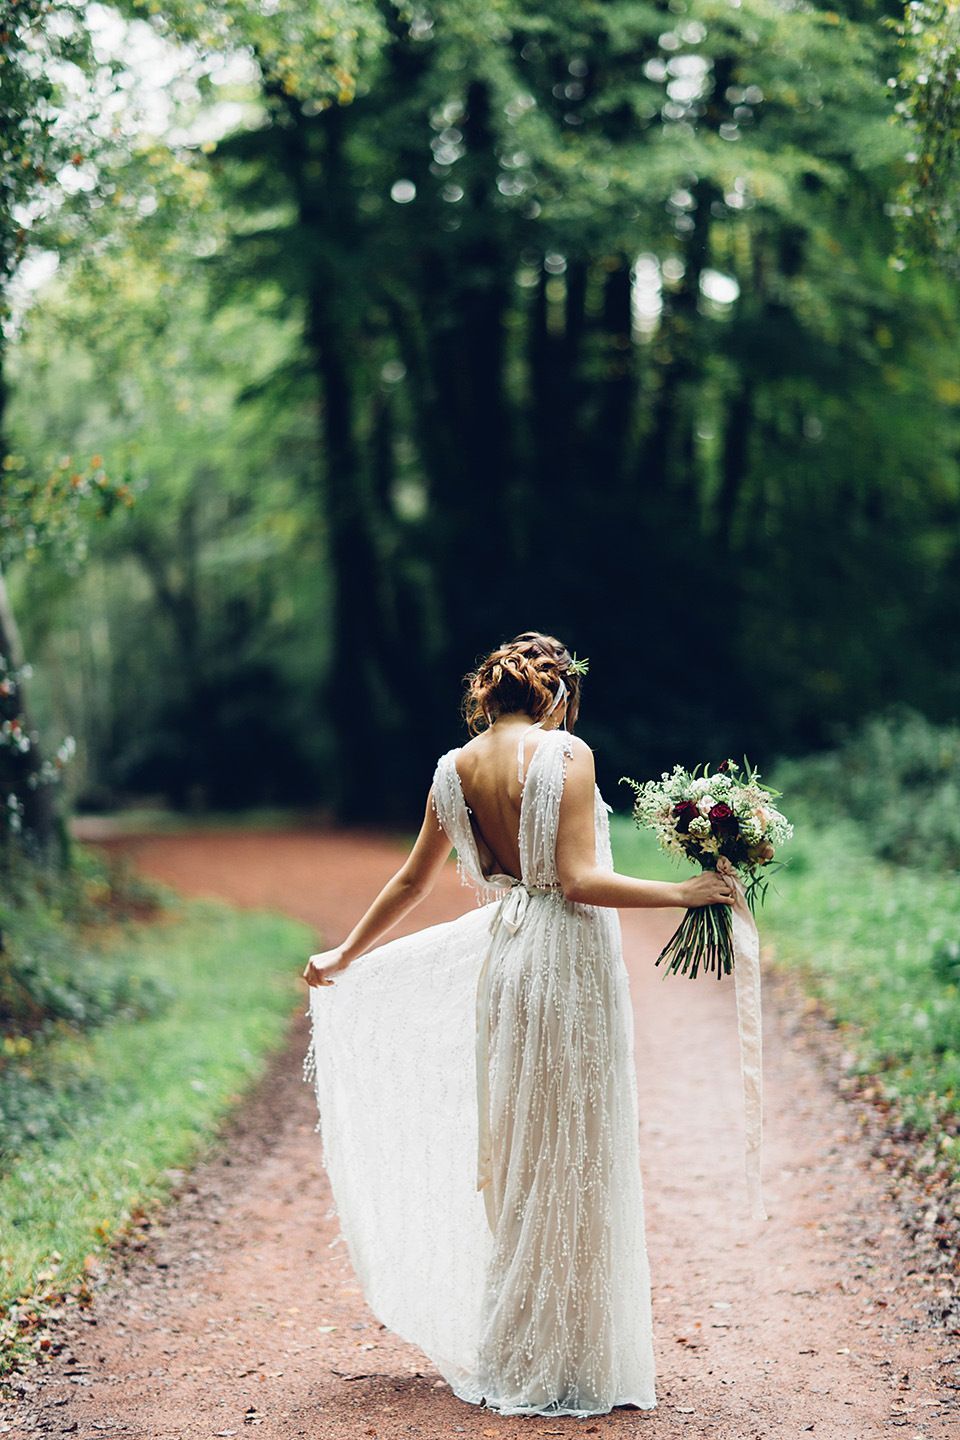 A Beautiful and Whimsical Woodland Elopement | Love My Dress® UK Wedding Blog